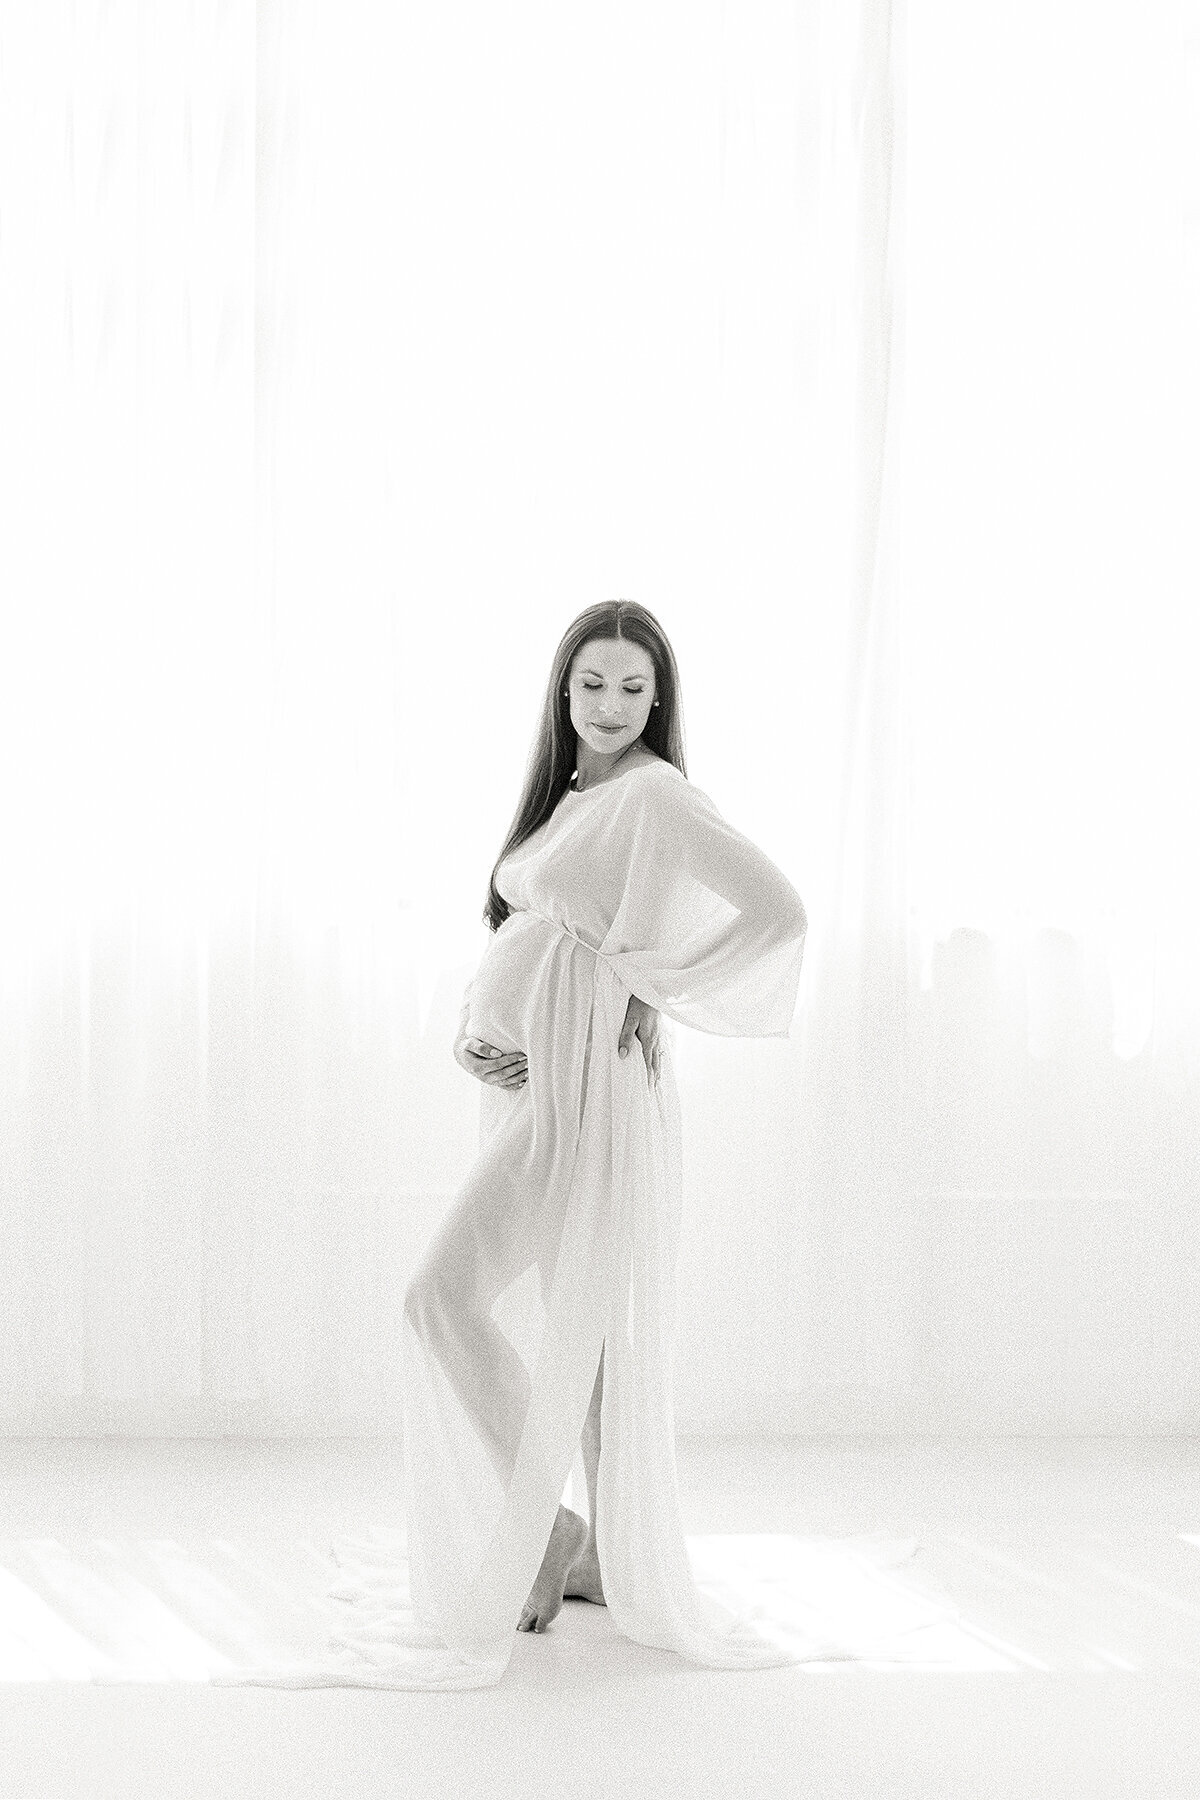 Black and white portrait of a pregnant mother posing in a DFW photography studio for her maternity session as she is wearing a chiffon gown as she holder her belly and looking over her shoulder.